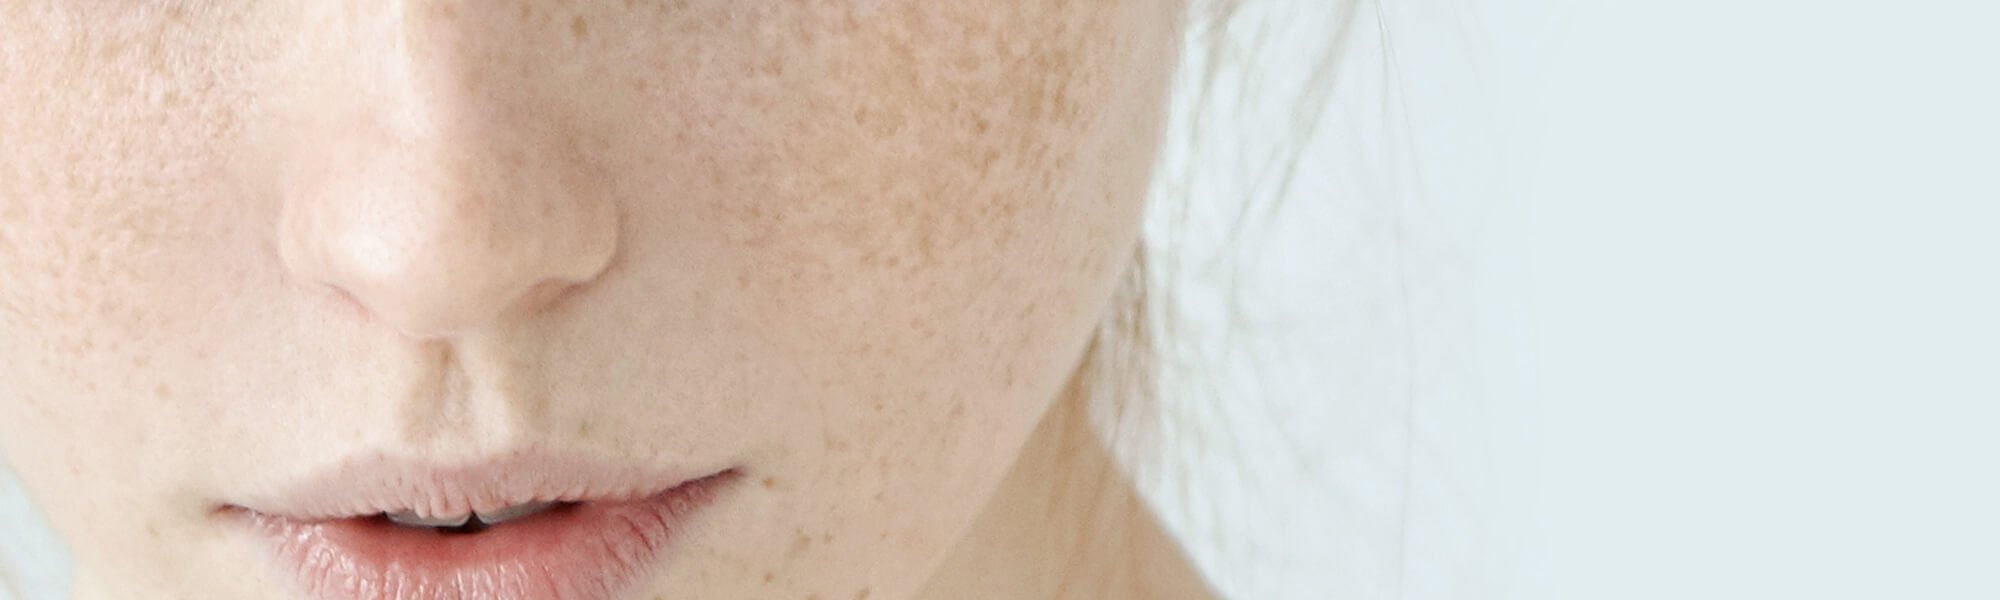 Say No To Skin Imperfections Article